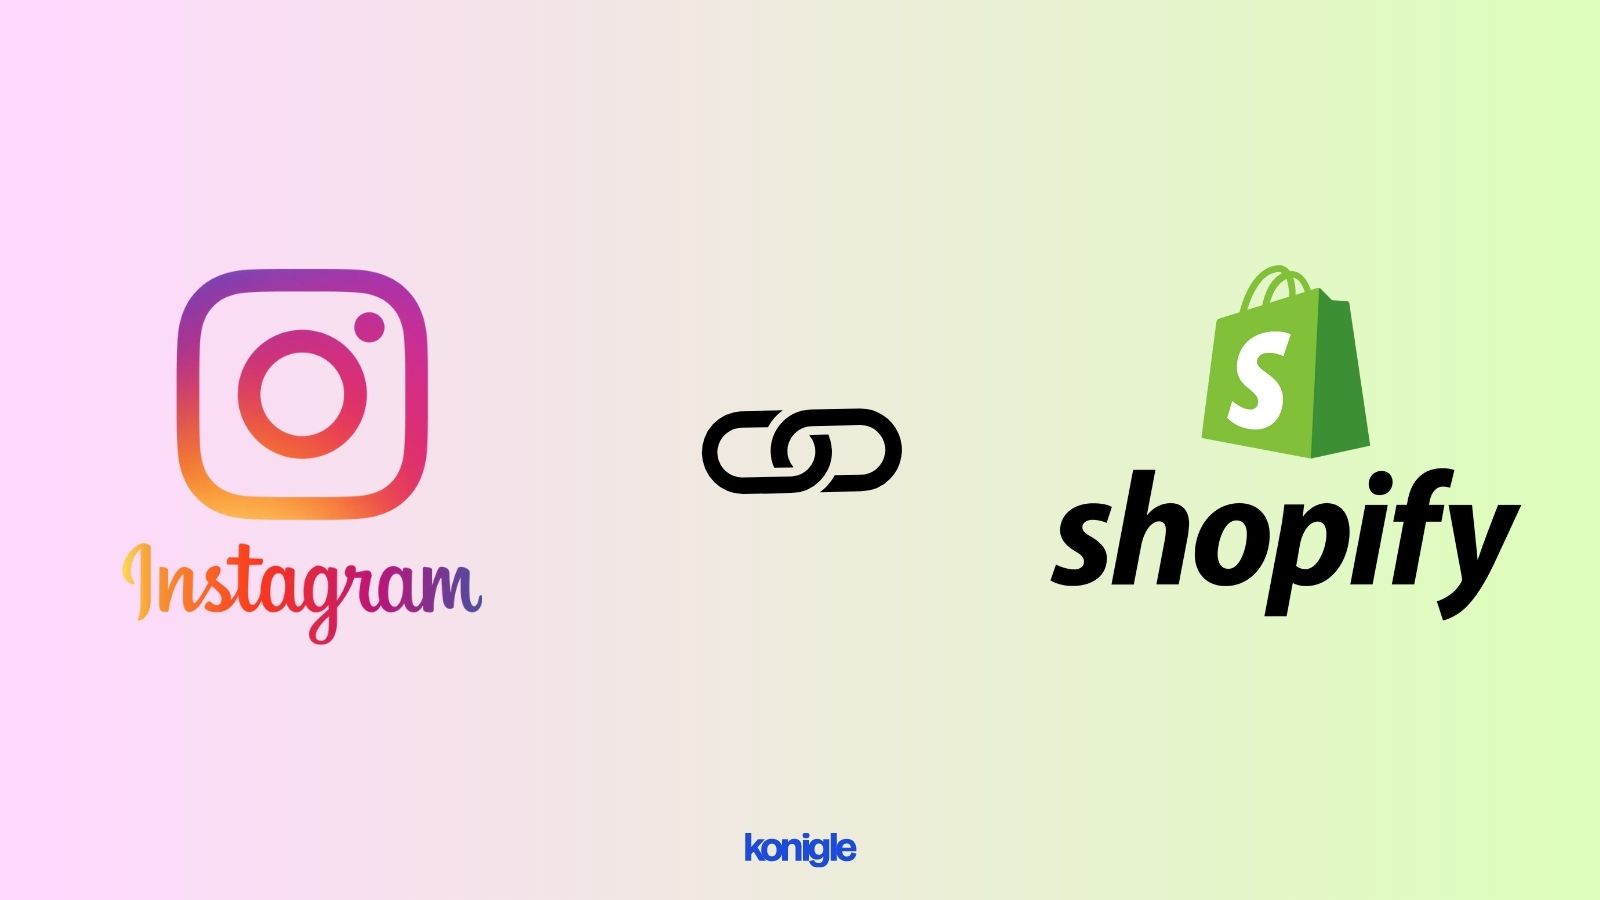 How to link Instagram to Shopify?